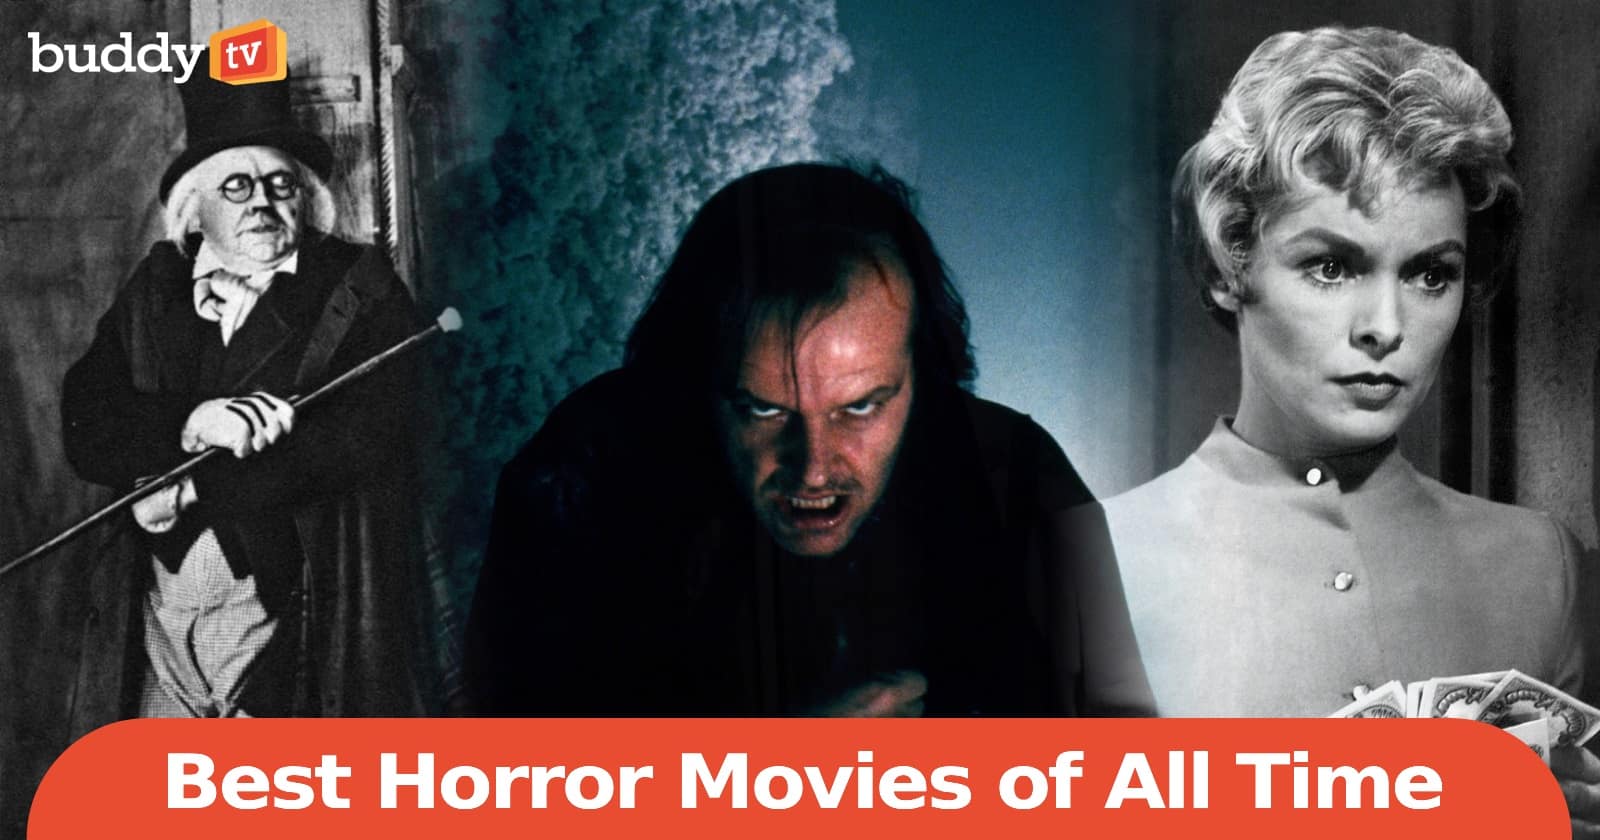 10 Best Horror Movies of All Time, Ranked by Viewers